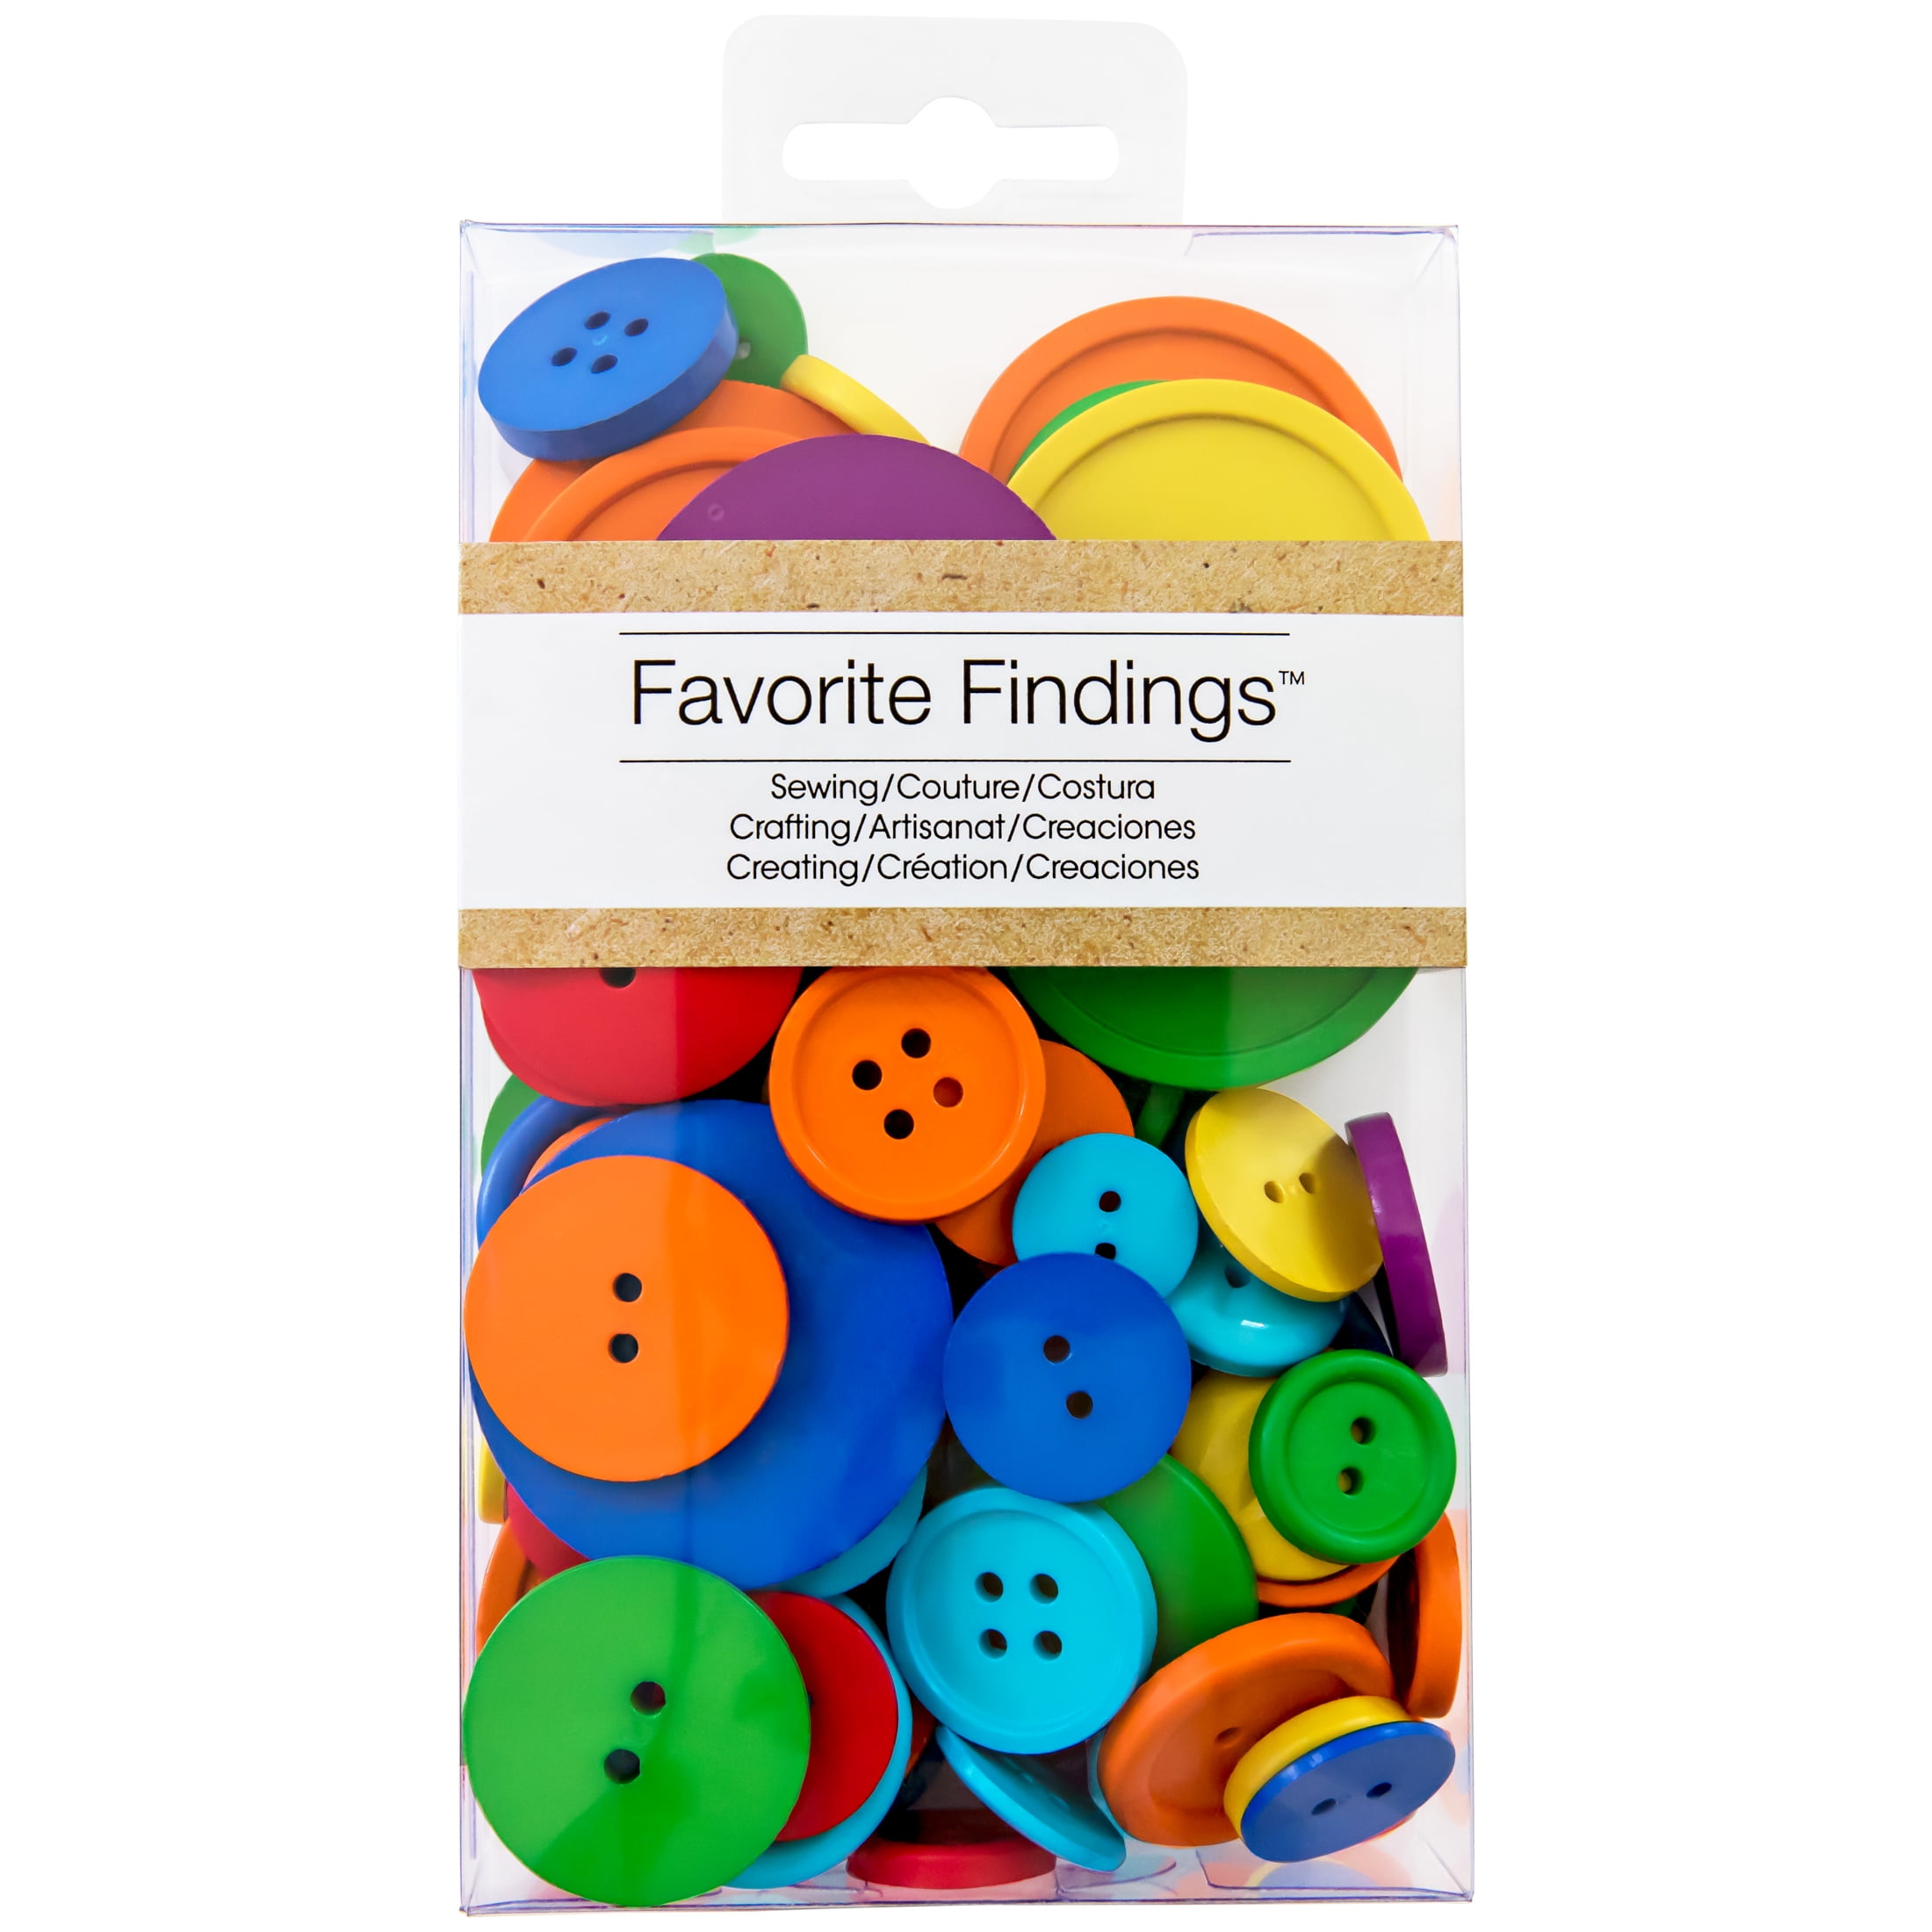 100pcs DIY Round Plastic Buttons 4 Holes Sewing Clothes Button for Crafts .mc 